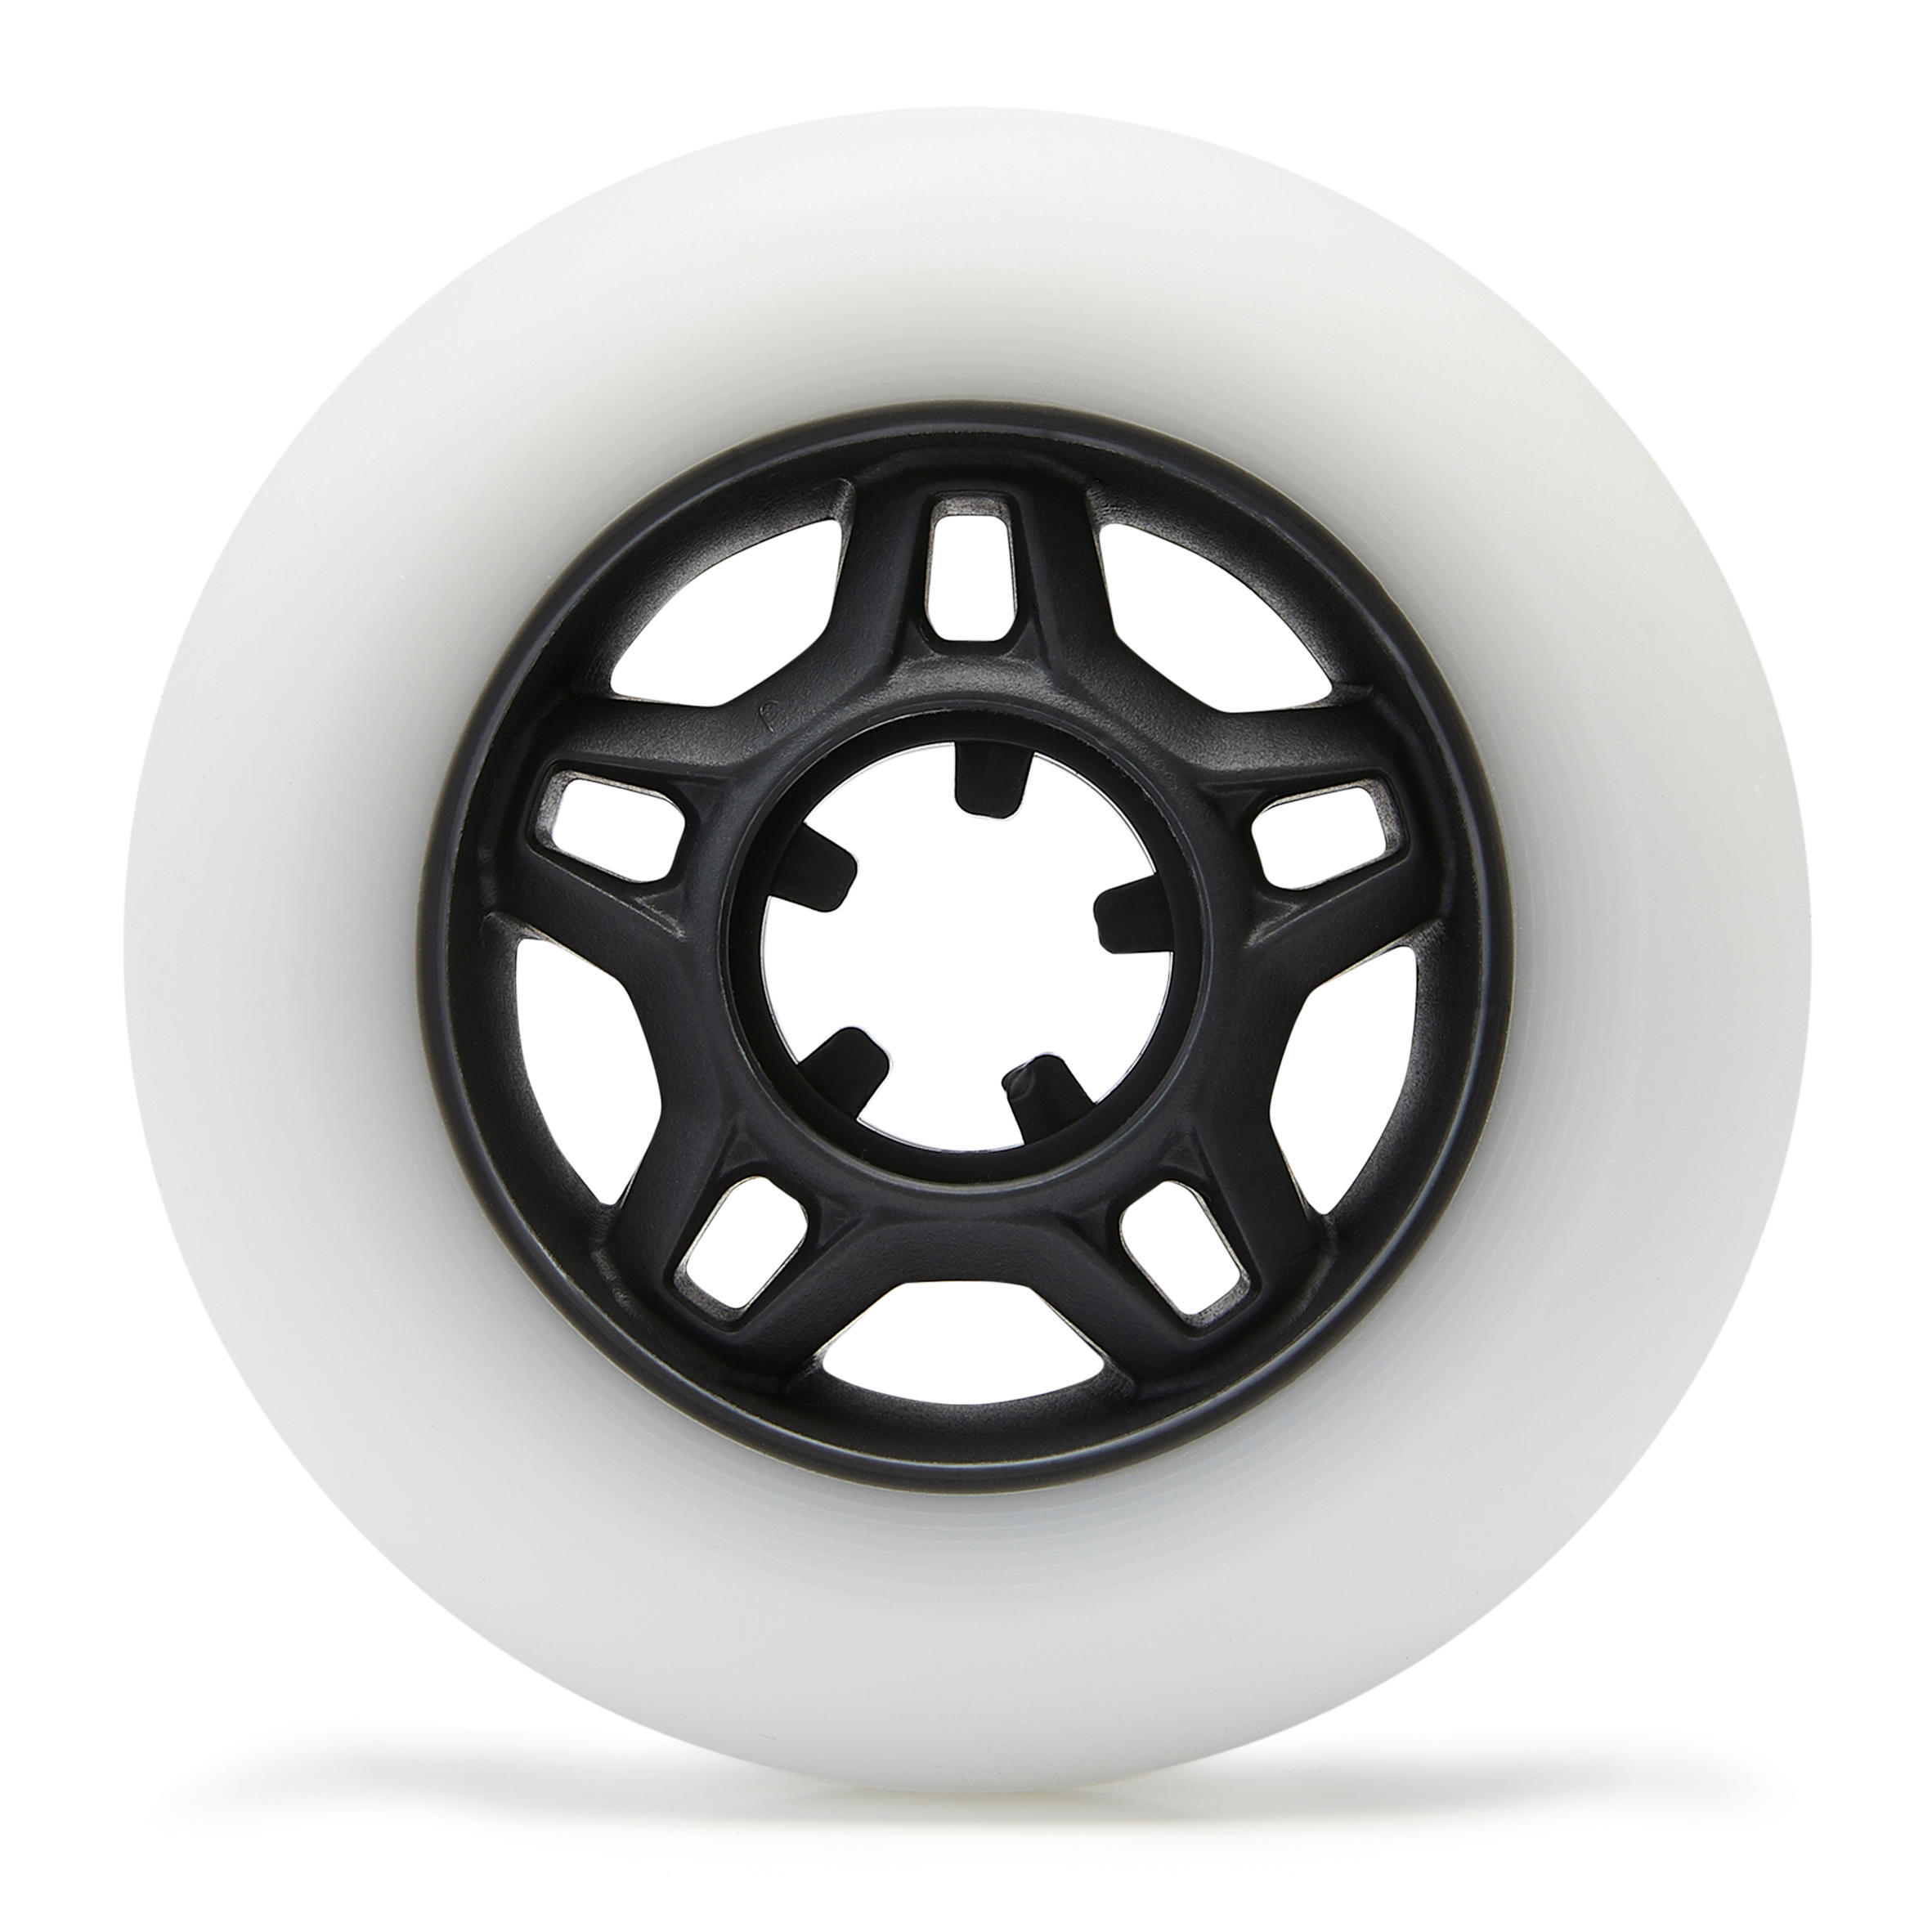 Adult 80mm 80A Fitness Inline Skating Wheels Fit 4-Pack - White 4/6